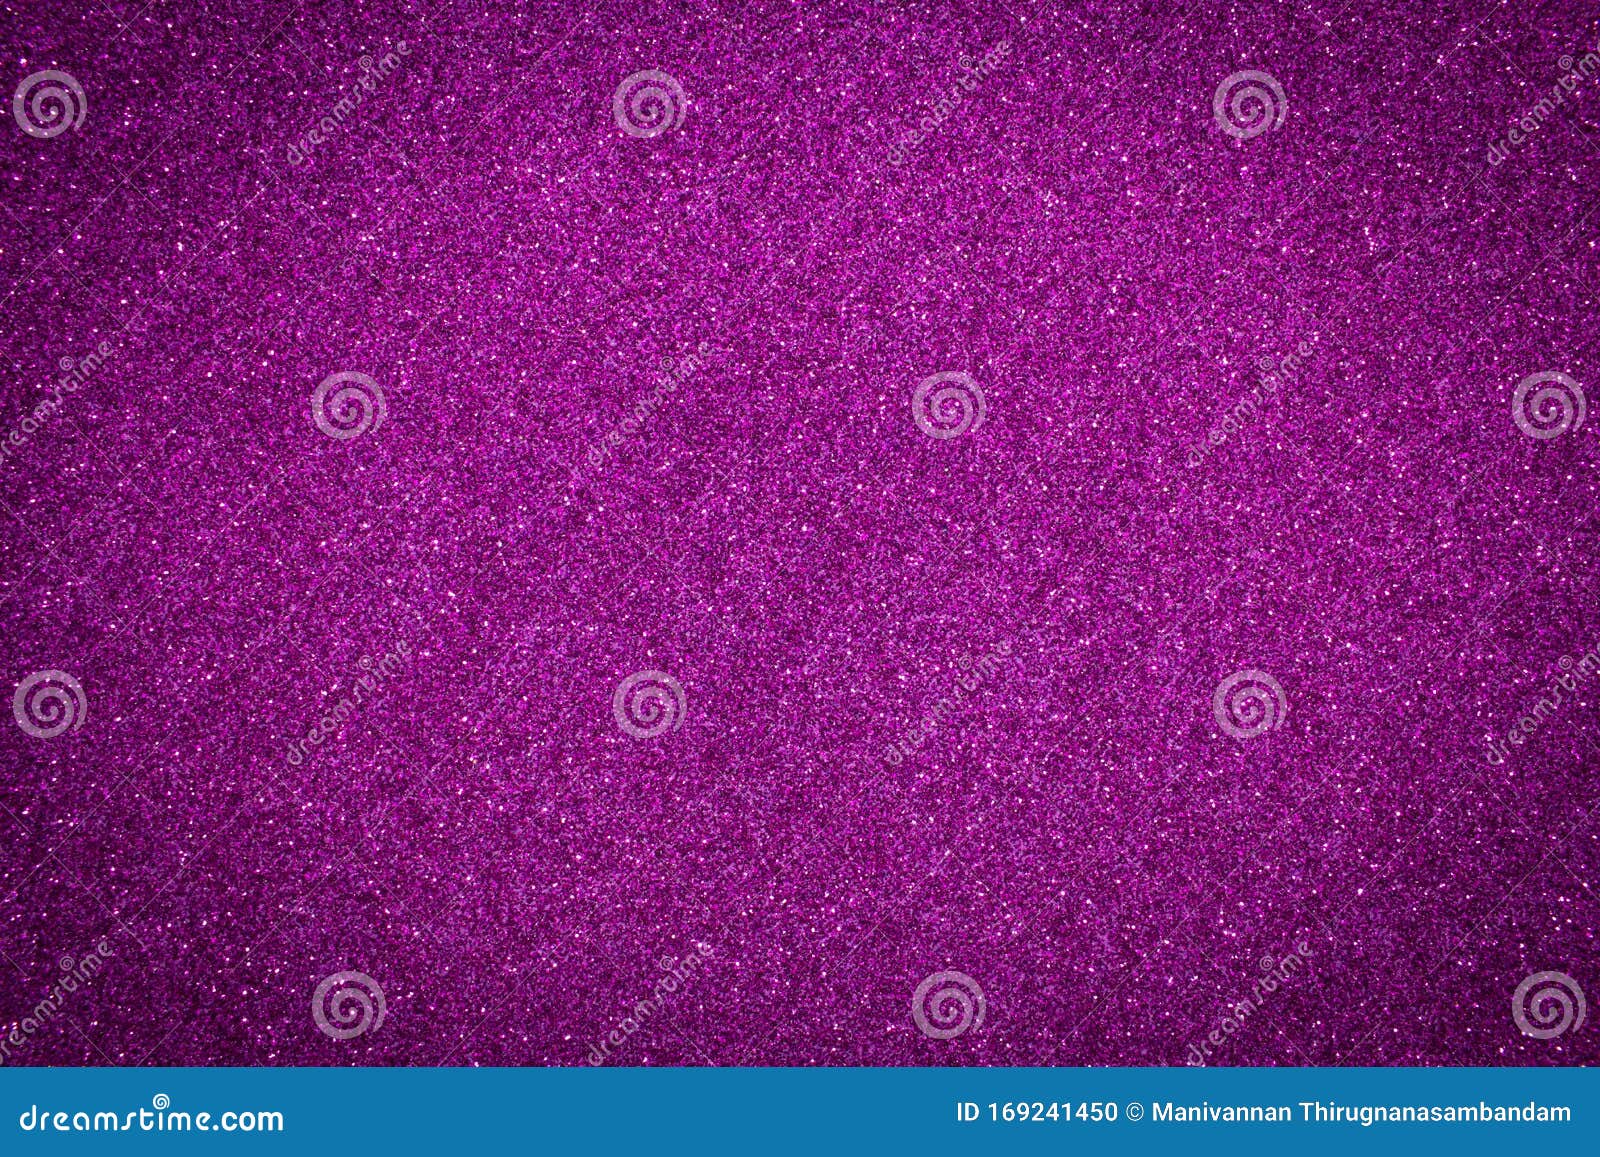 Shiny Background Glitter with Purple Texture. Purple Colour Background with  Glitter Effect Stock Photo - Image of glowing, blank: 169241450